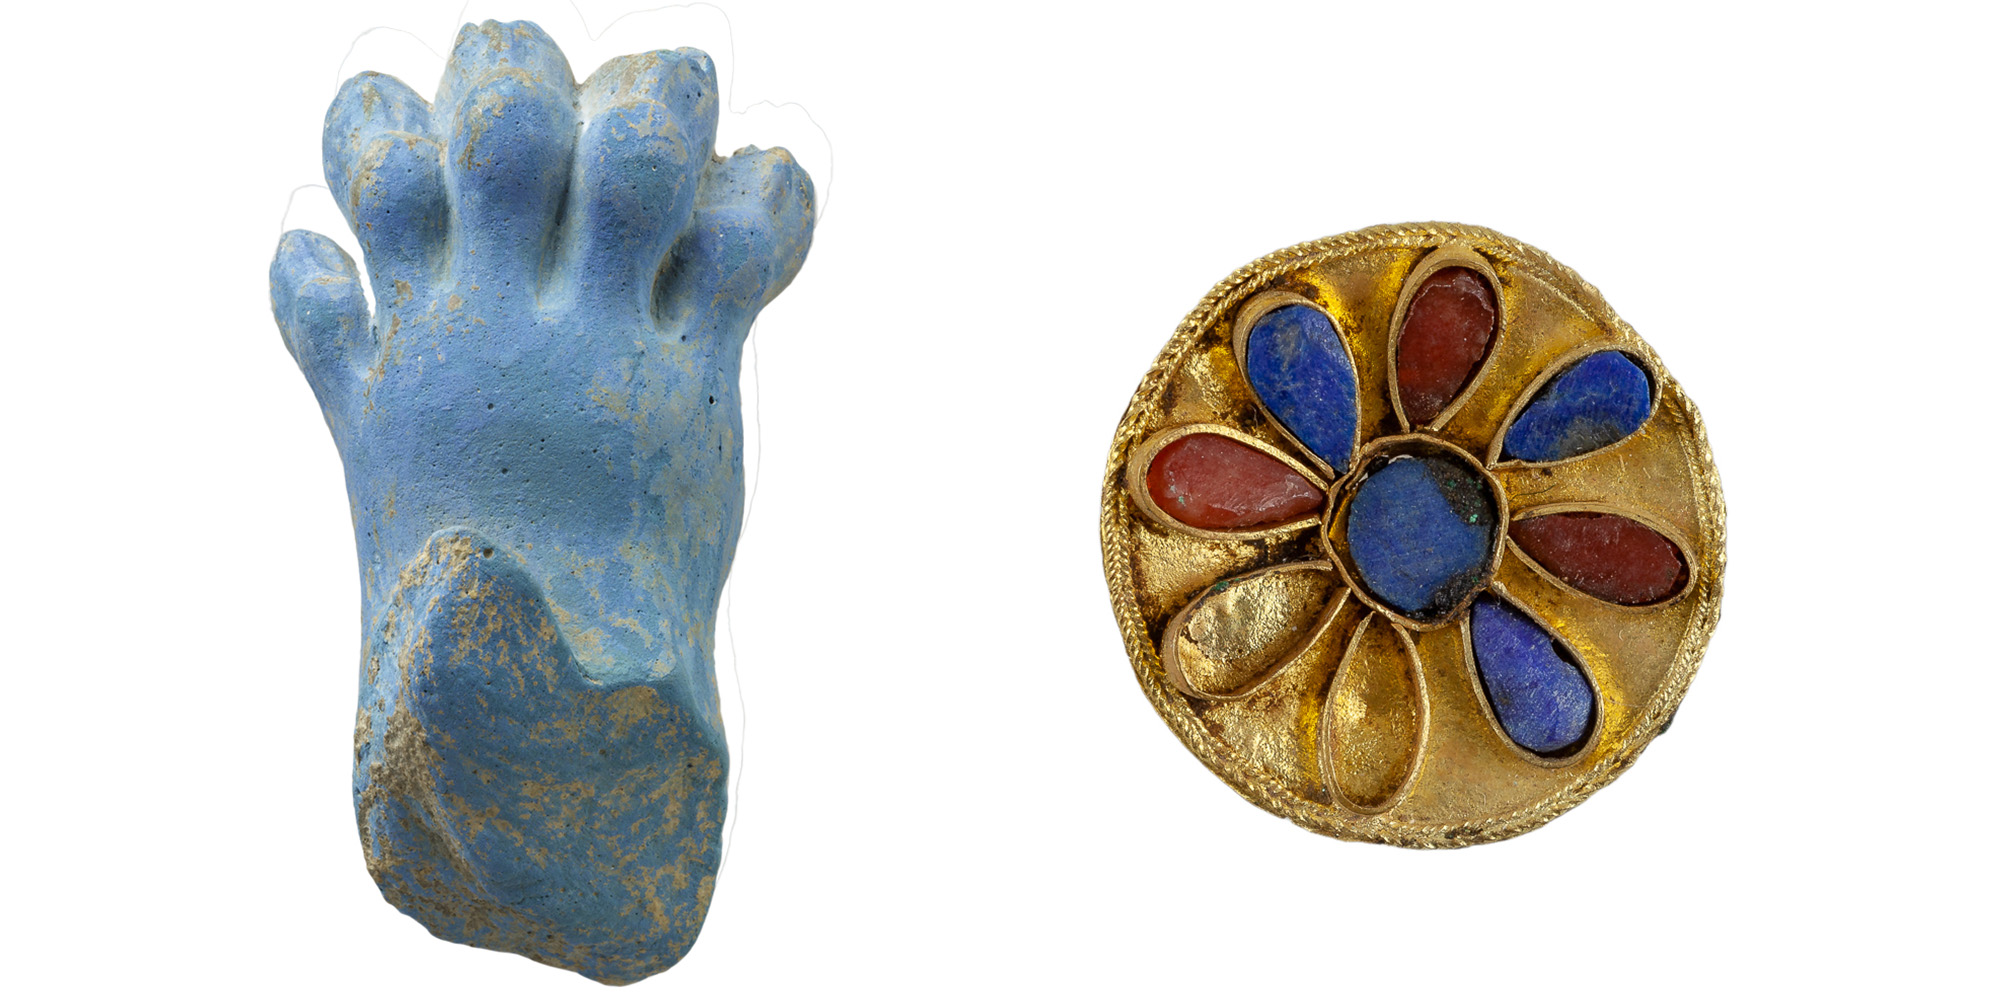 lions paw from Persepolis and a brooch from Bismaya